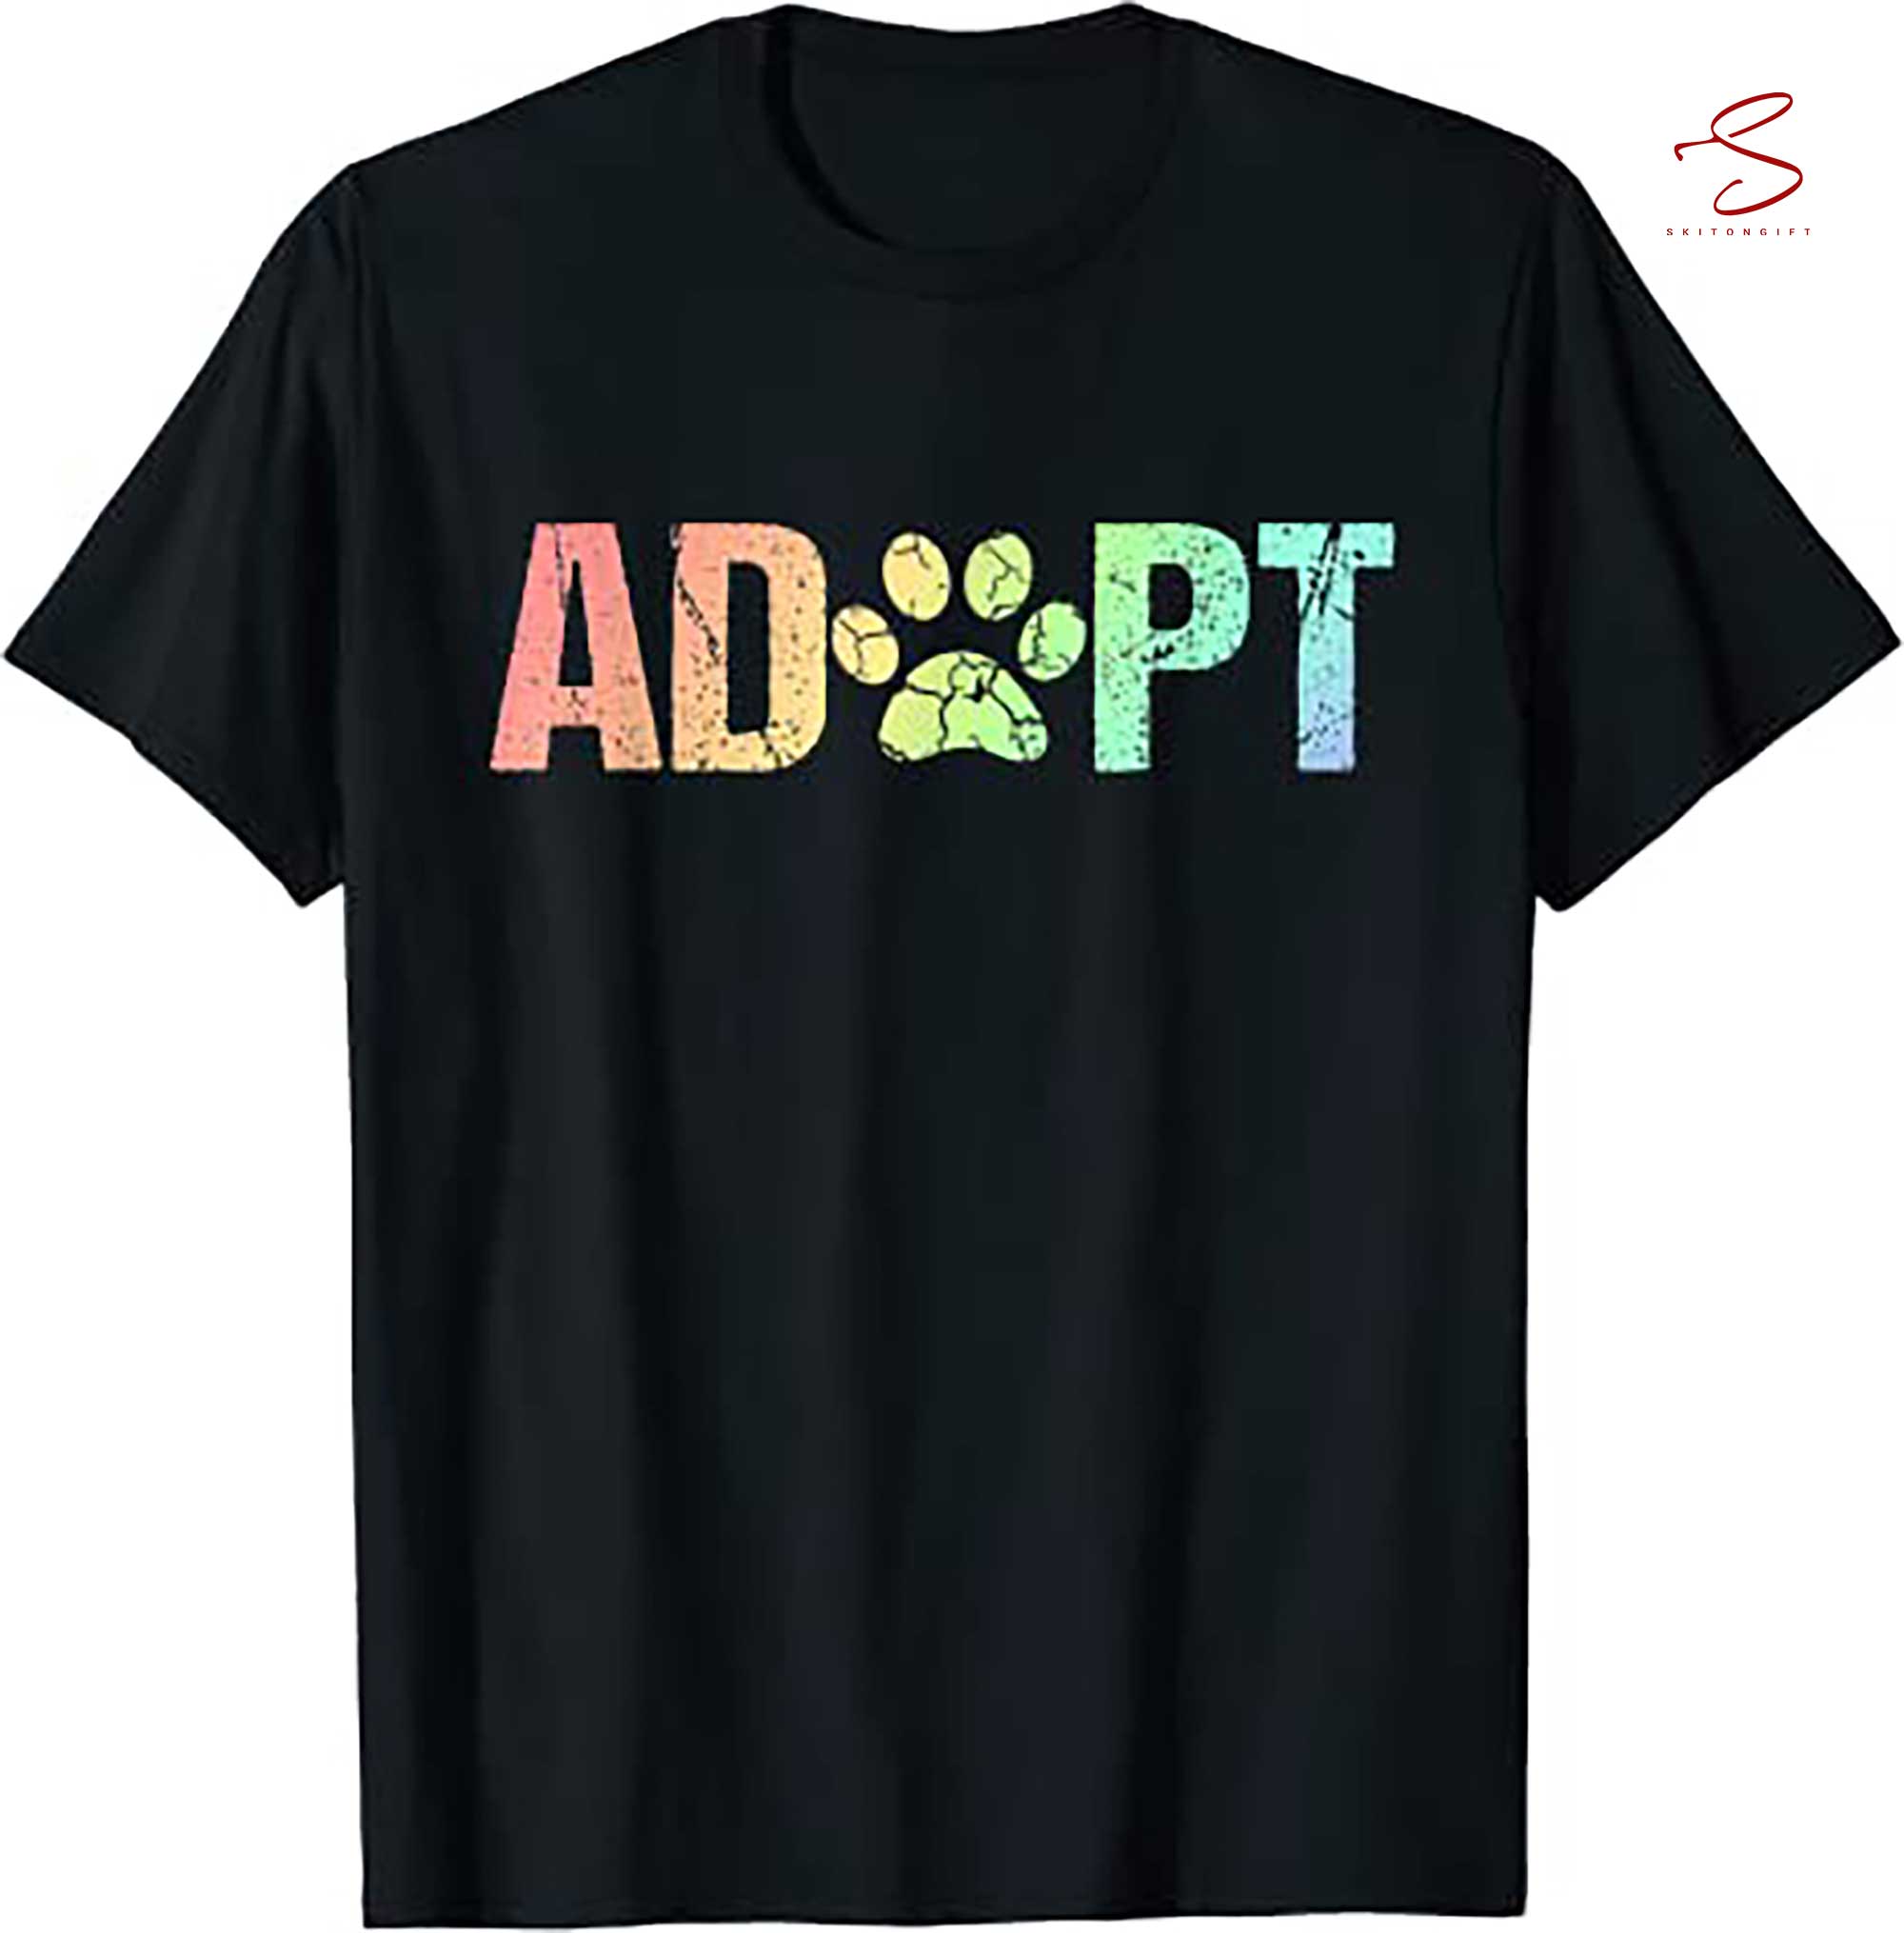 Skitongift Vintage Rainbow Adopt A Dog Rescue Foster Adoption Month T Shirt Funny Shirts Long Sleeve Tee Hoody Hoodie